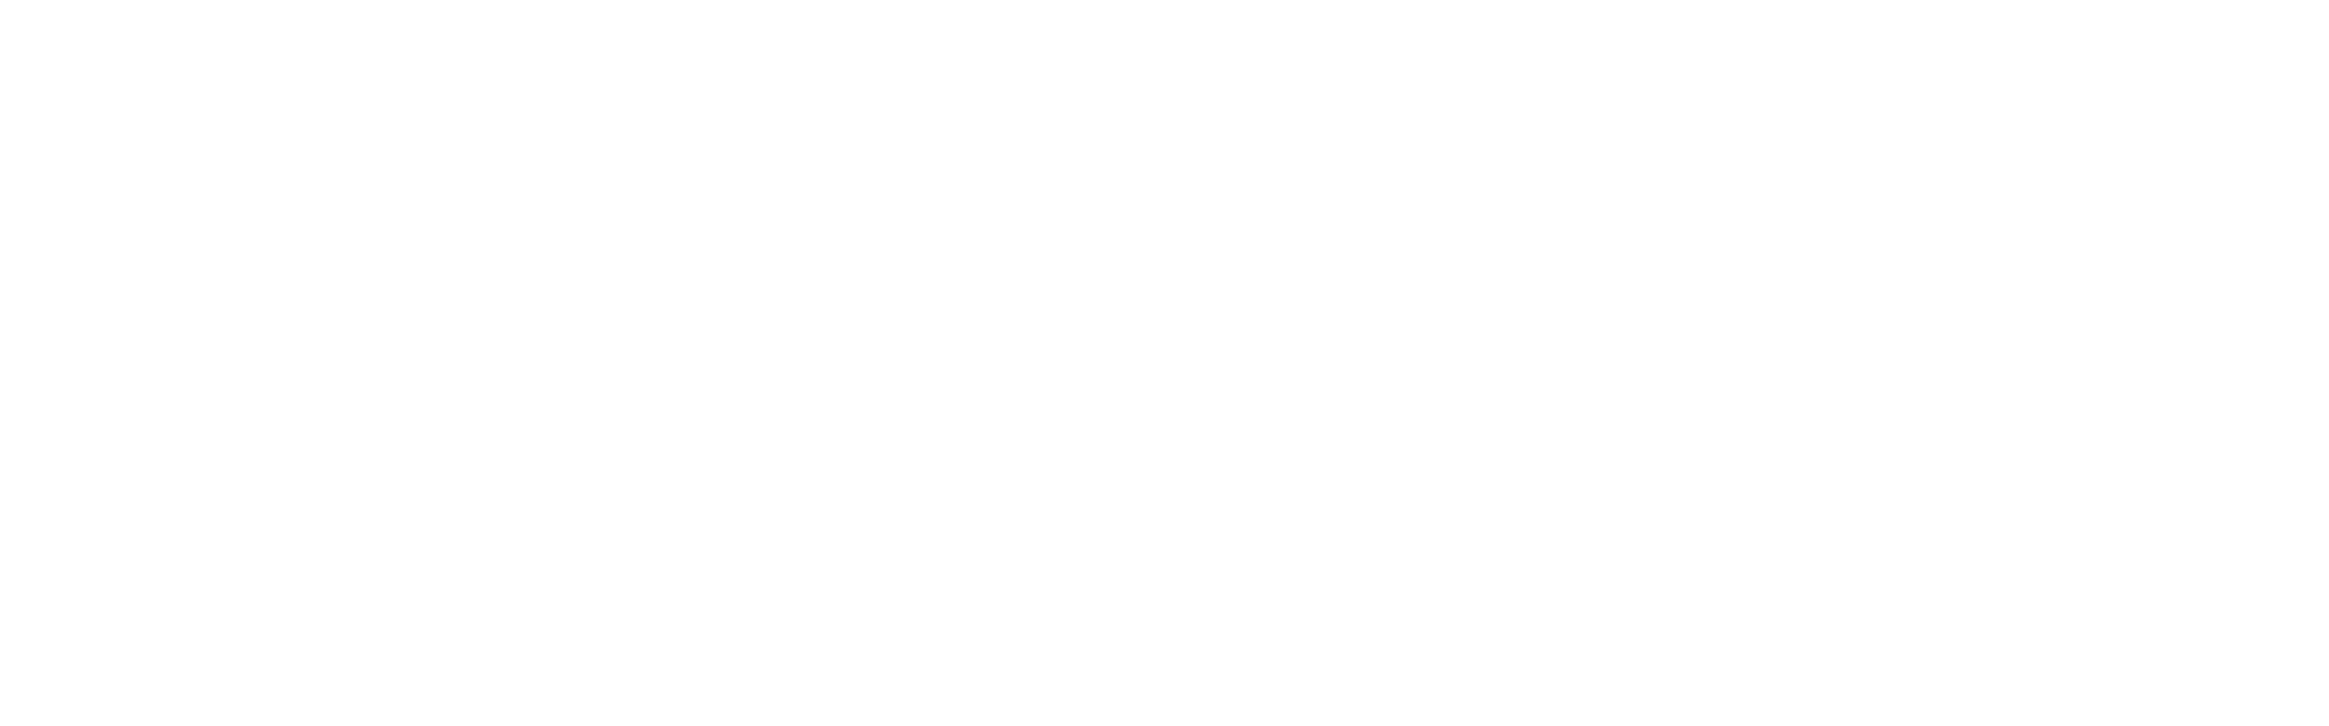 Palms and More